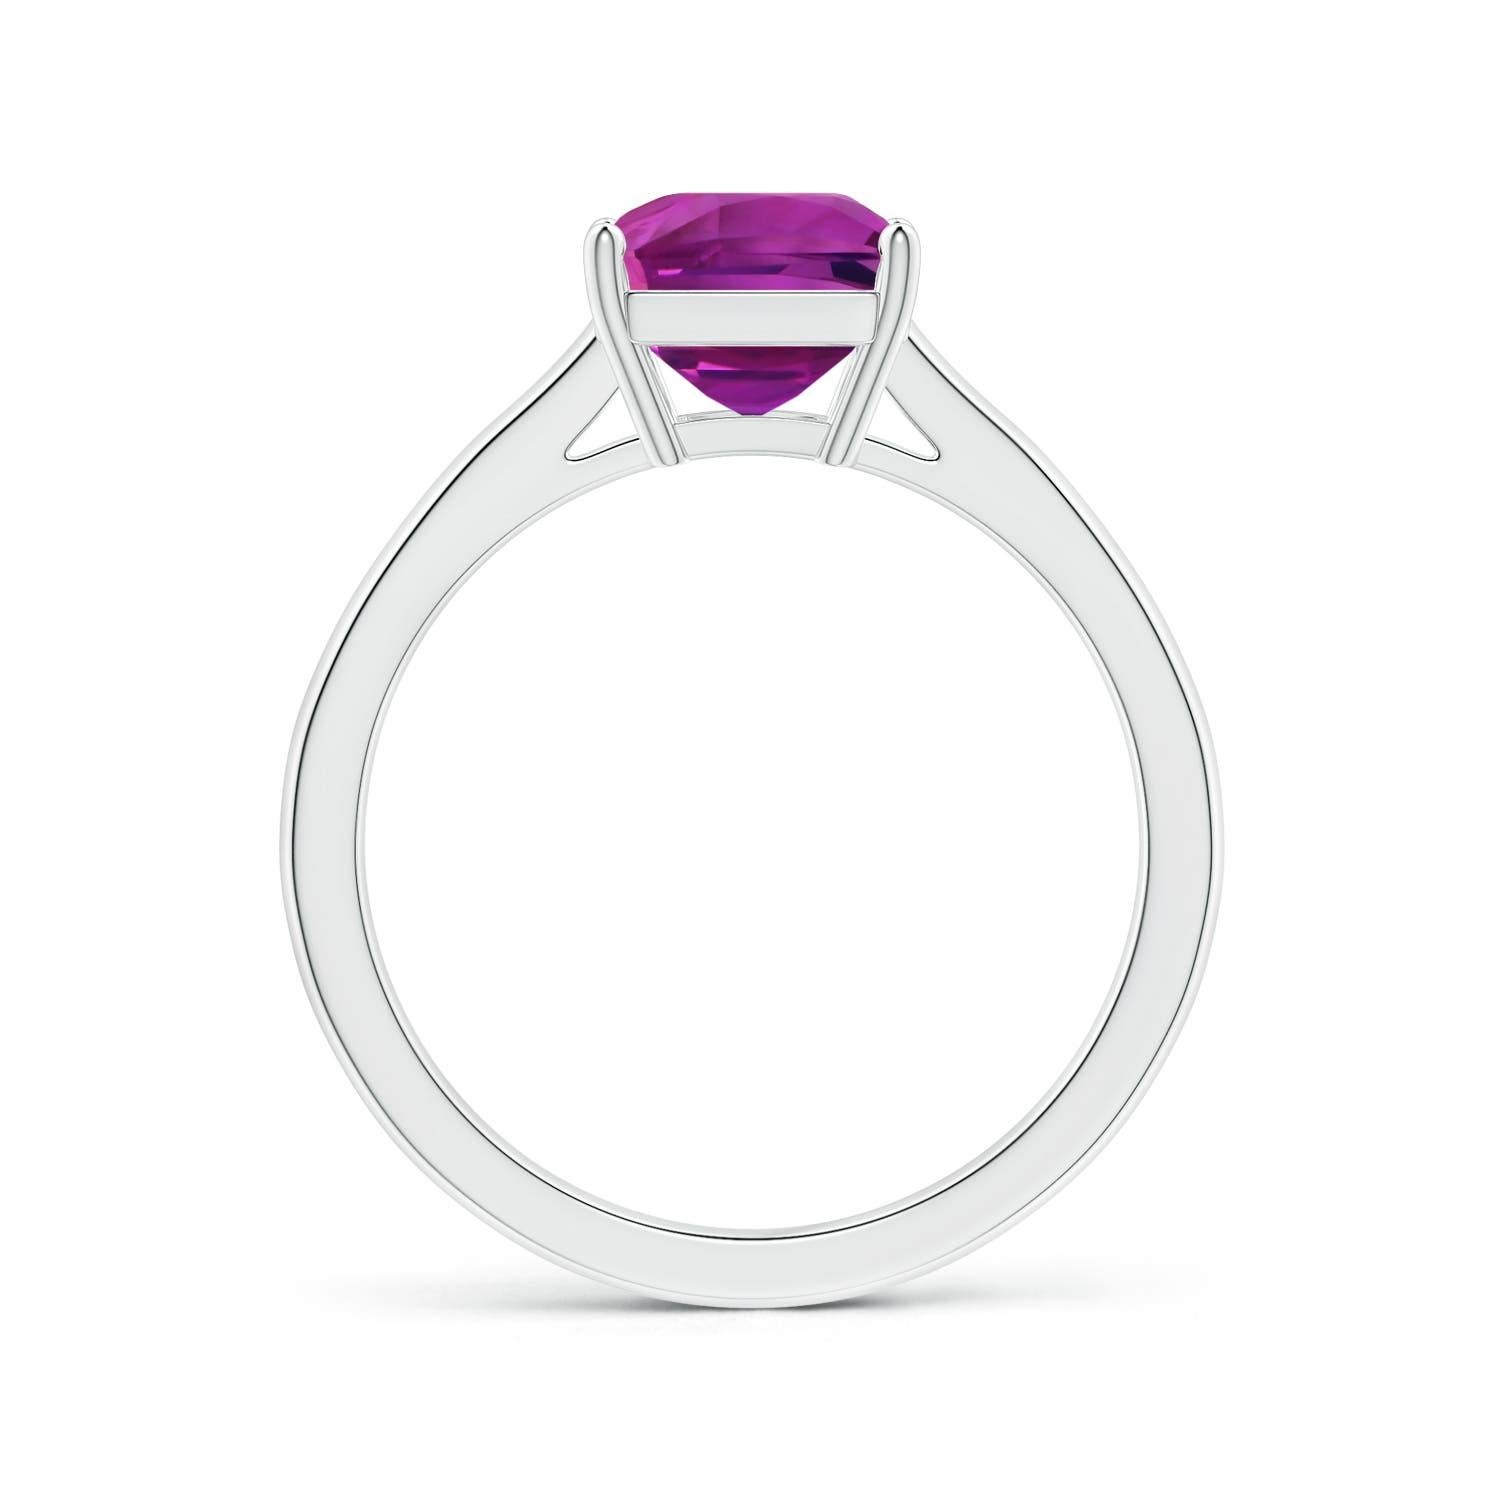 For Sale:  ANGARA GIA Certified Emerald-Cut Pink Sapphire Solitaire Ring in Platinum 2